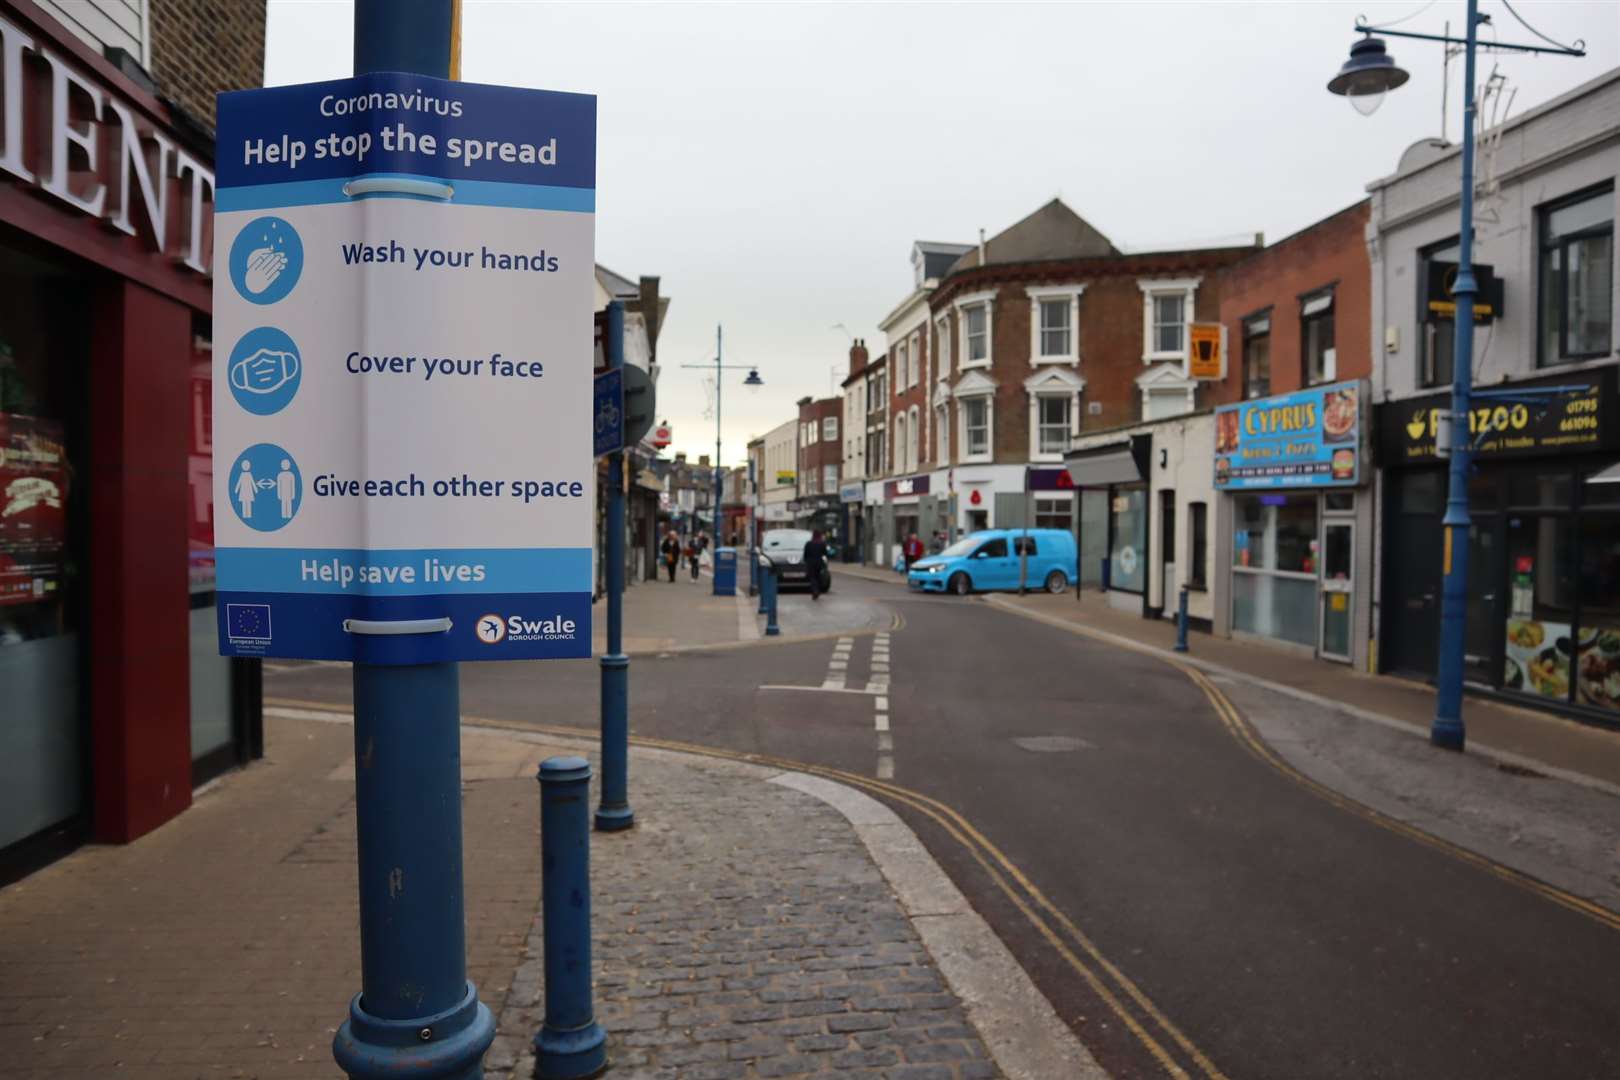 A coronavirus warning in Sheerness High Street, which is in Swale - one the worst-hit parts of the county